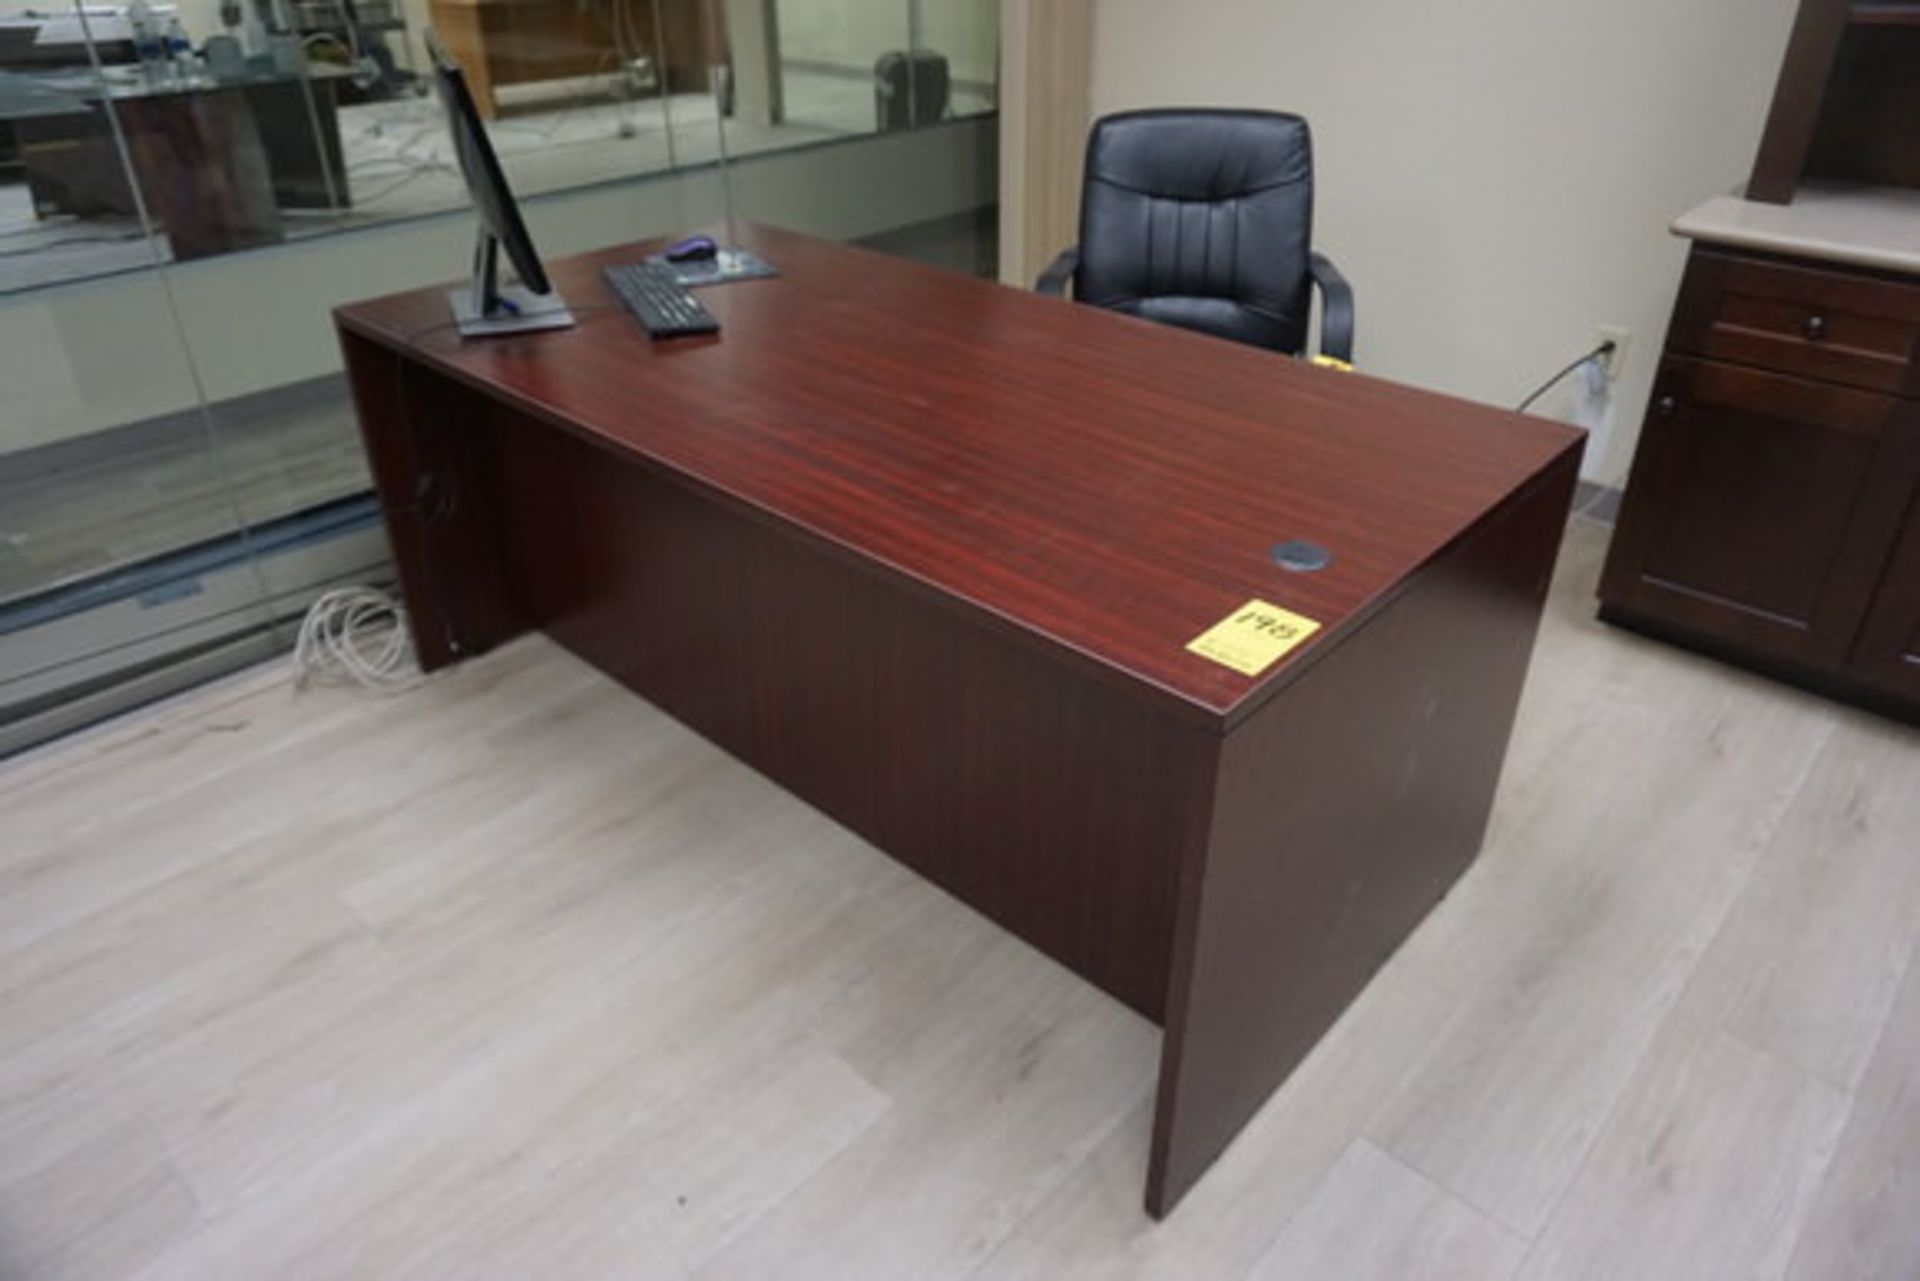 EXECUTIVE DESK, OFFICE CHAIR, COMPUTER MONITOR